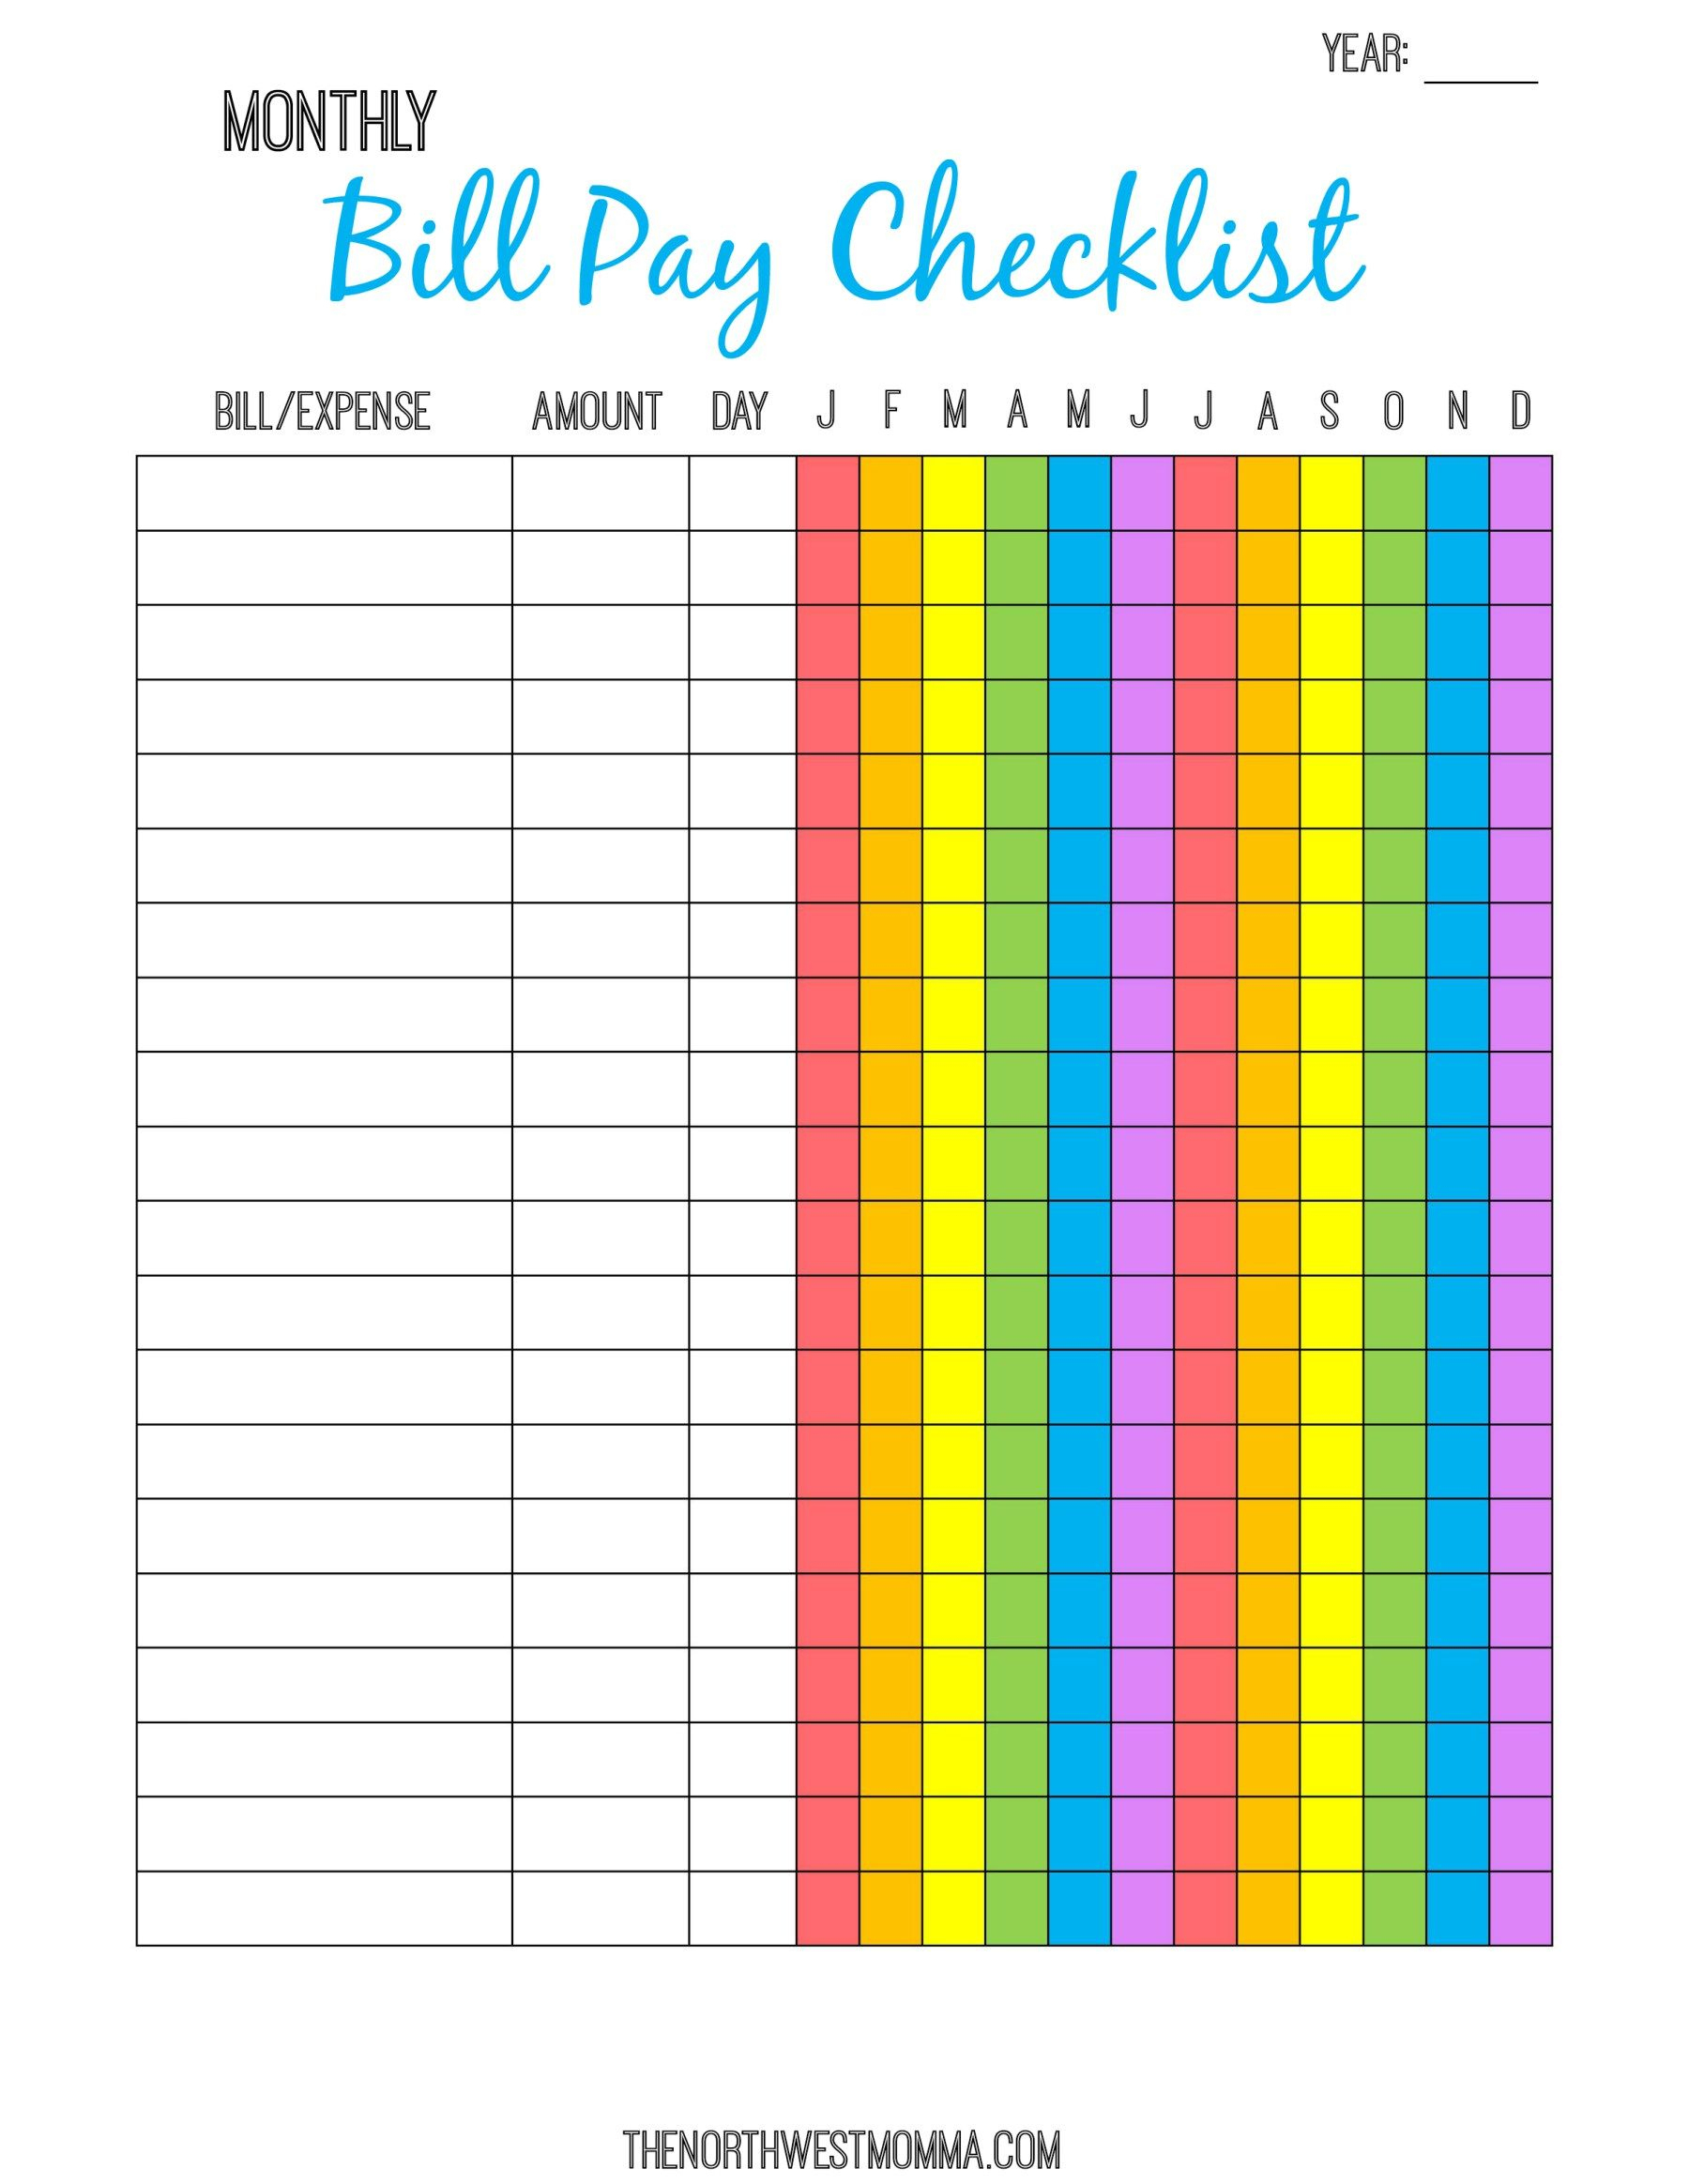 Monthly Bill Pay Checklist- Free Printable | $ Saving Money - Free Printable Monthly Bill Payment Worksheet